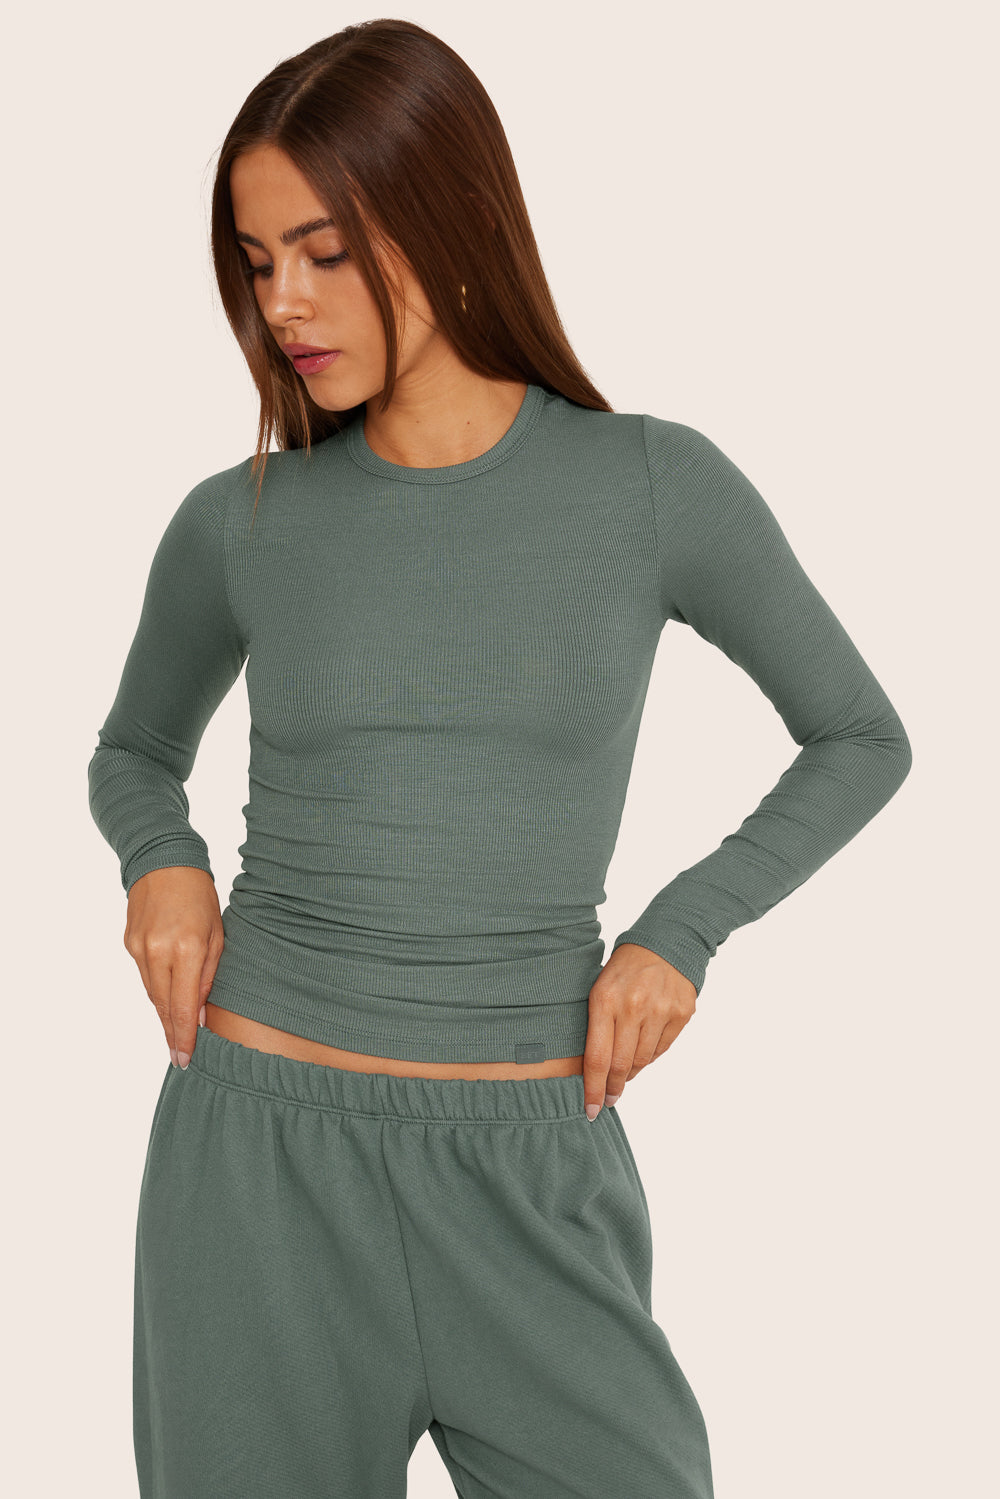 SET™ RIBBED MODAL ESSENTIAL LONG SLEEVE IN WAVE